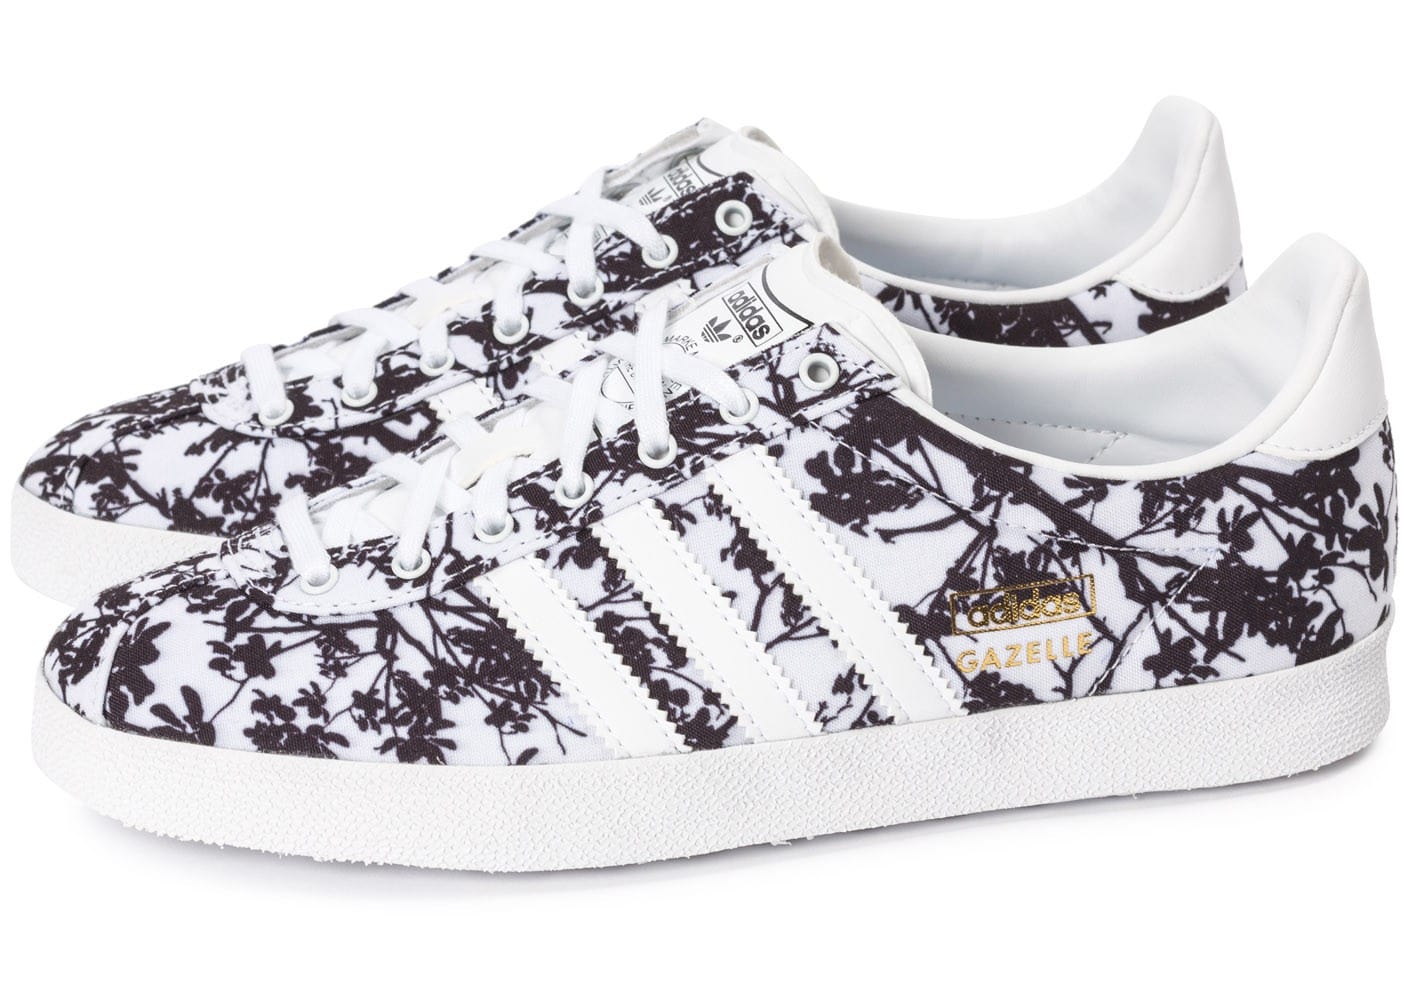 adidas gazelle femme ouedkniss|adidas gazelle femme ouedkniss outlet